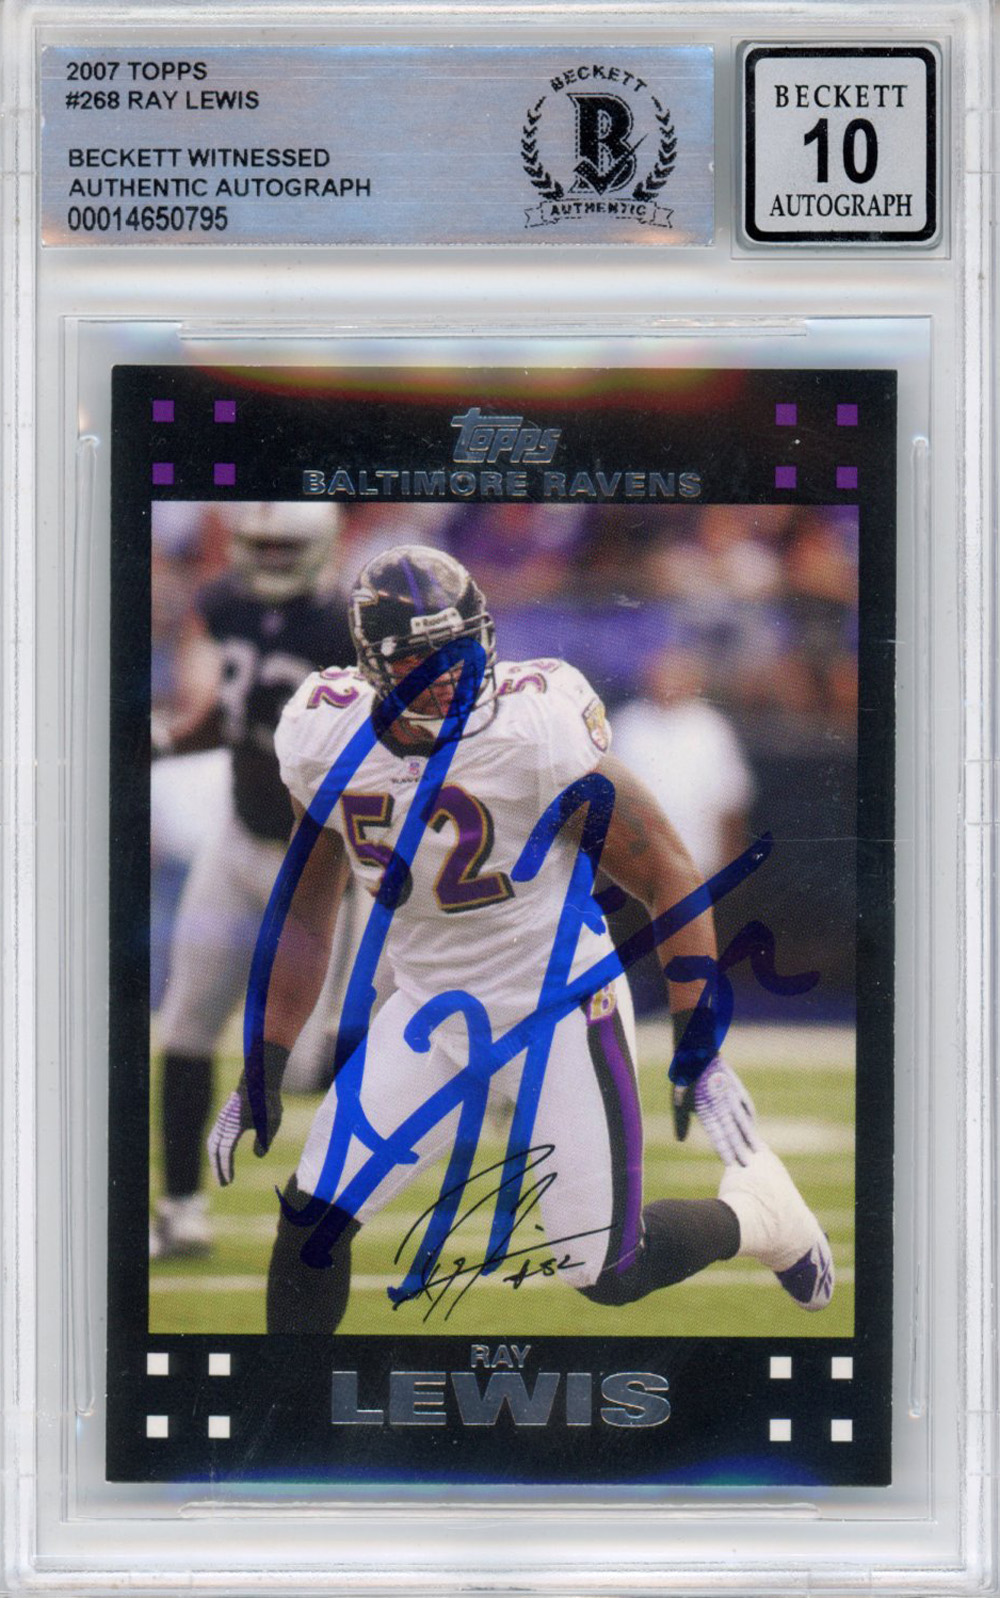 Ray Lewis Autographed/Signed 2007 Topps #268 Trading Card Beckett Slab